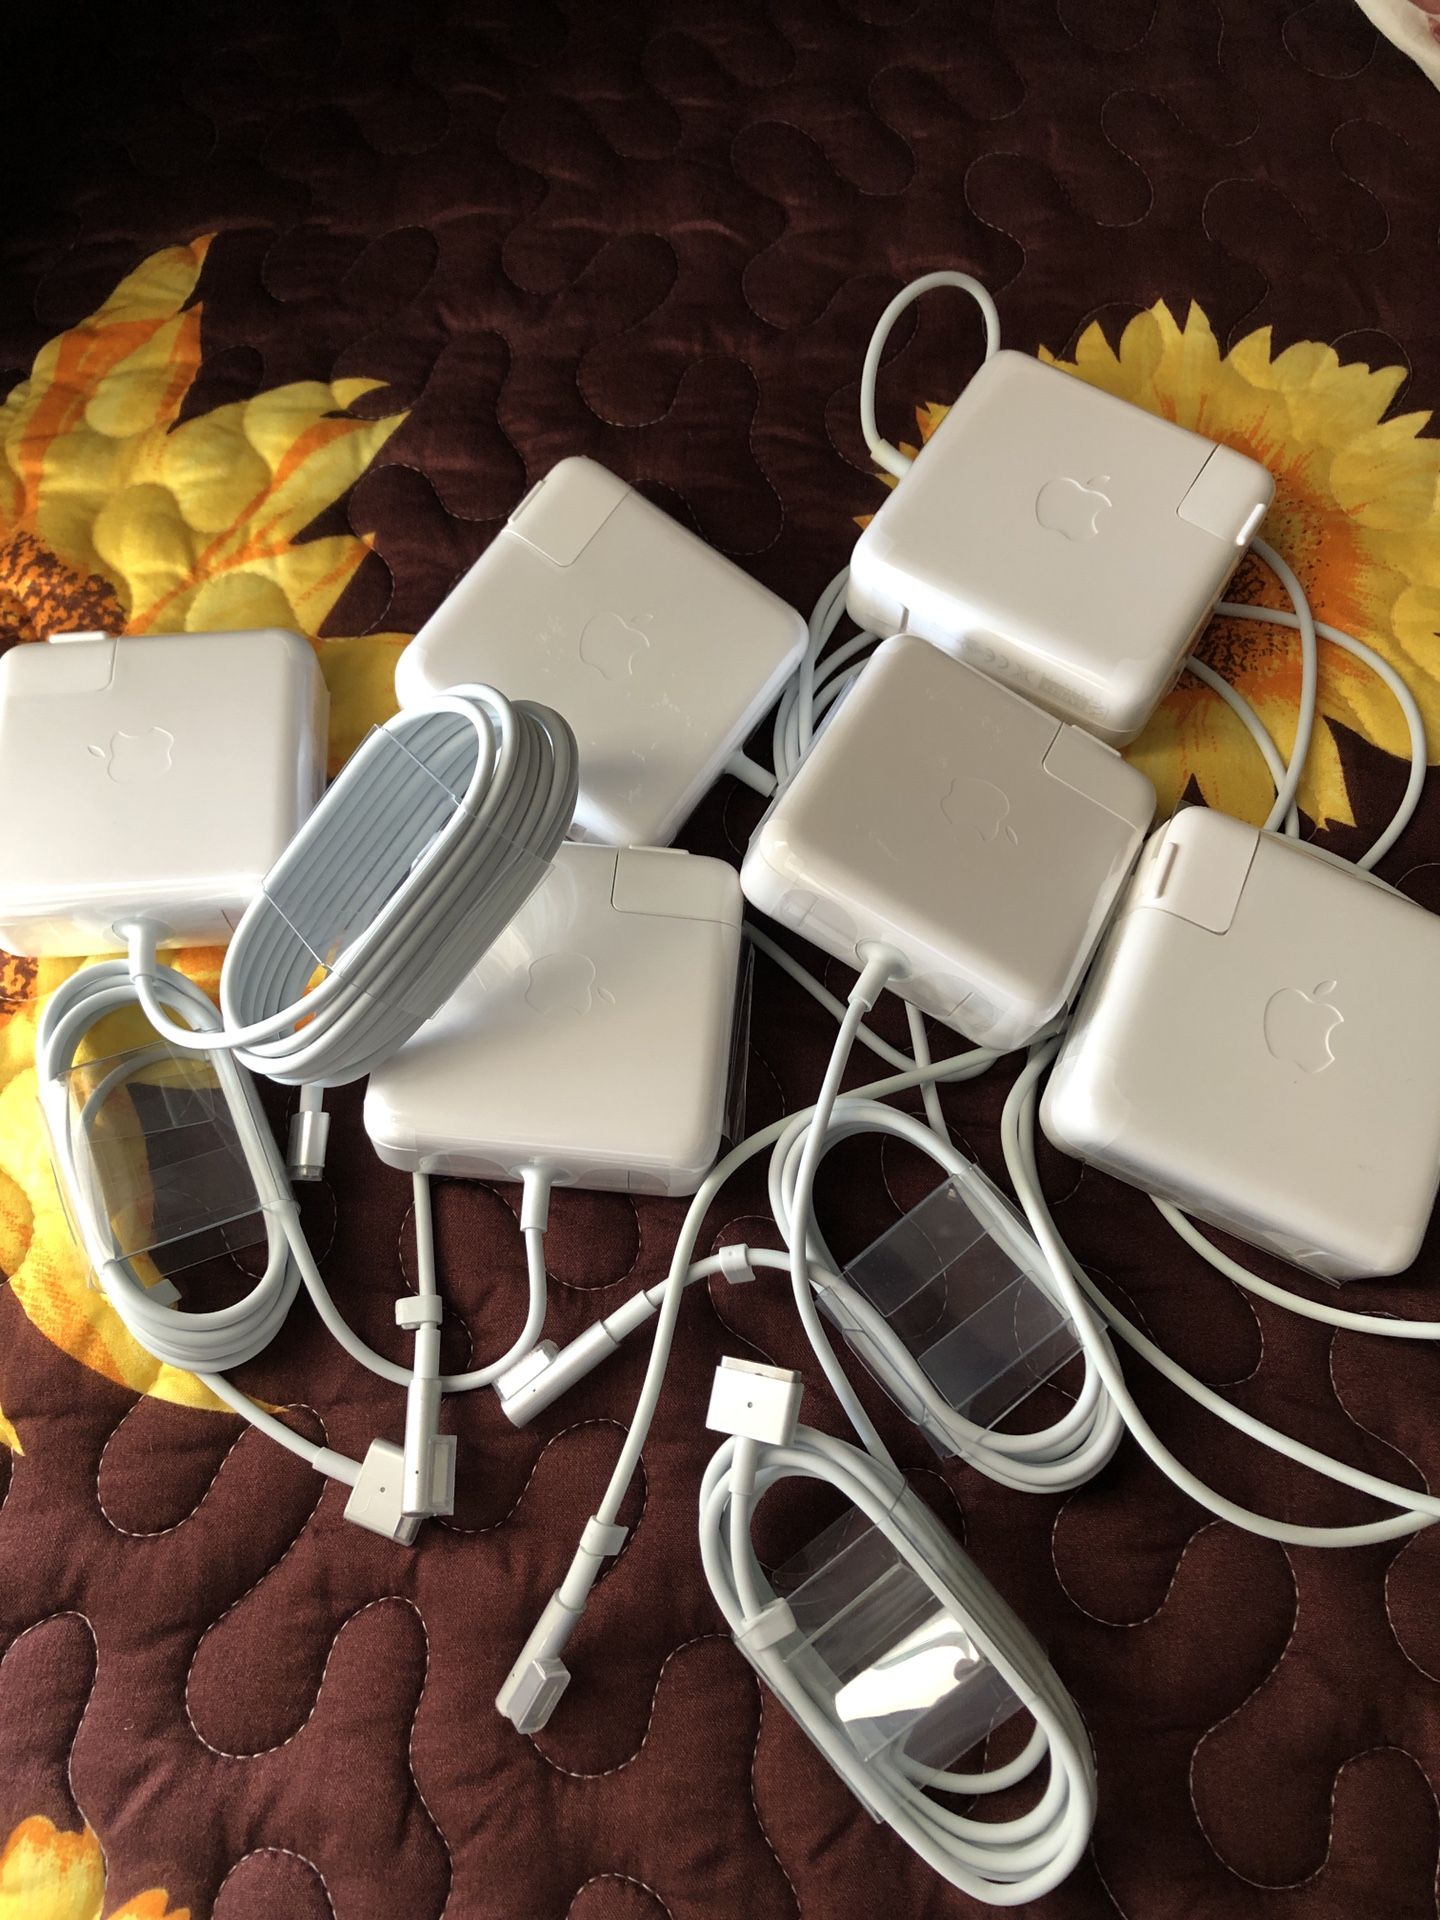 MacBook Pro and MacBook Air chargers